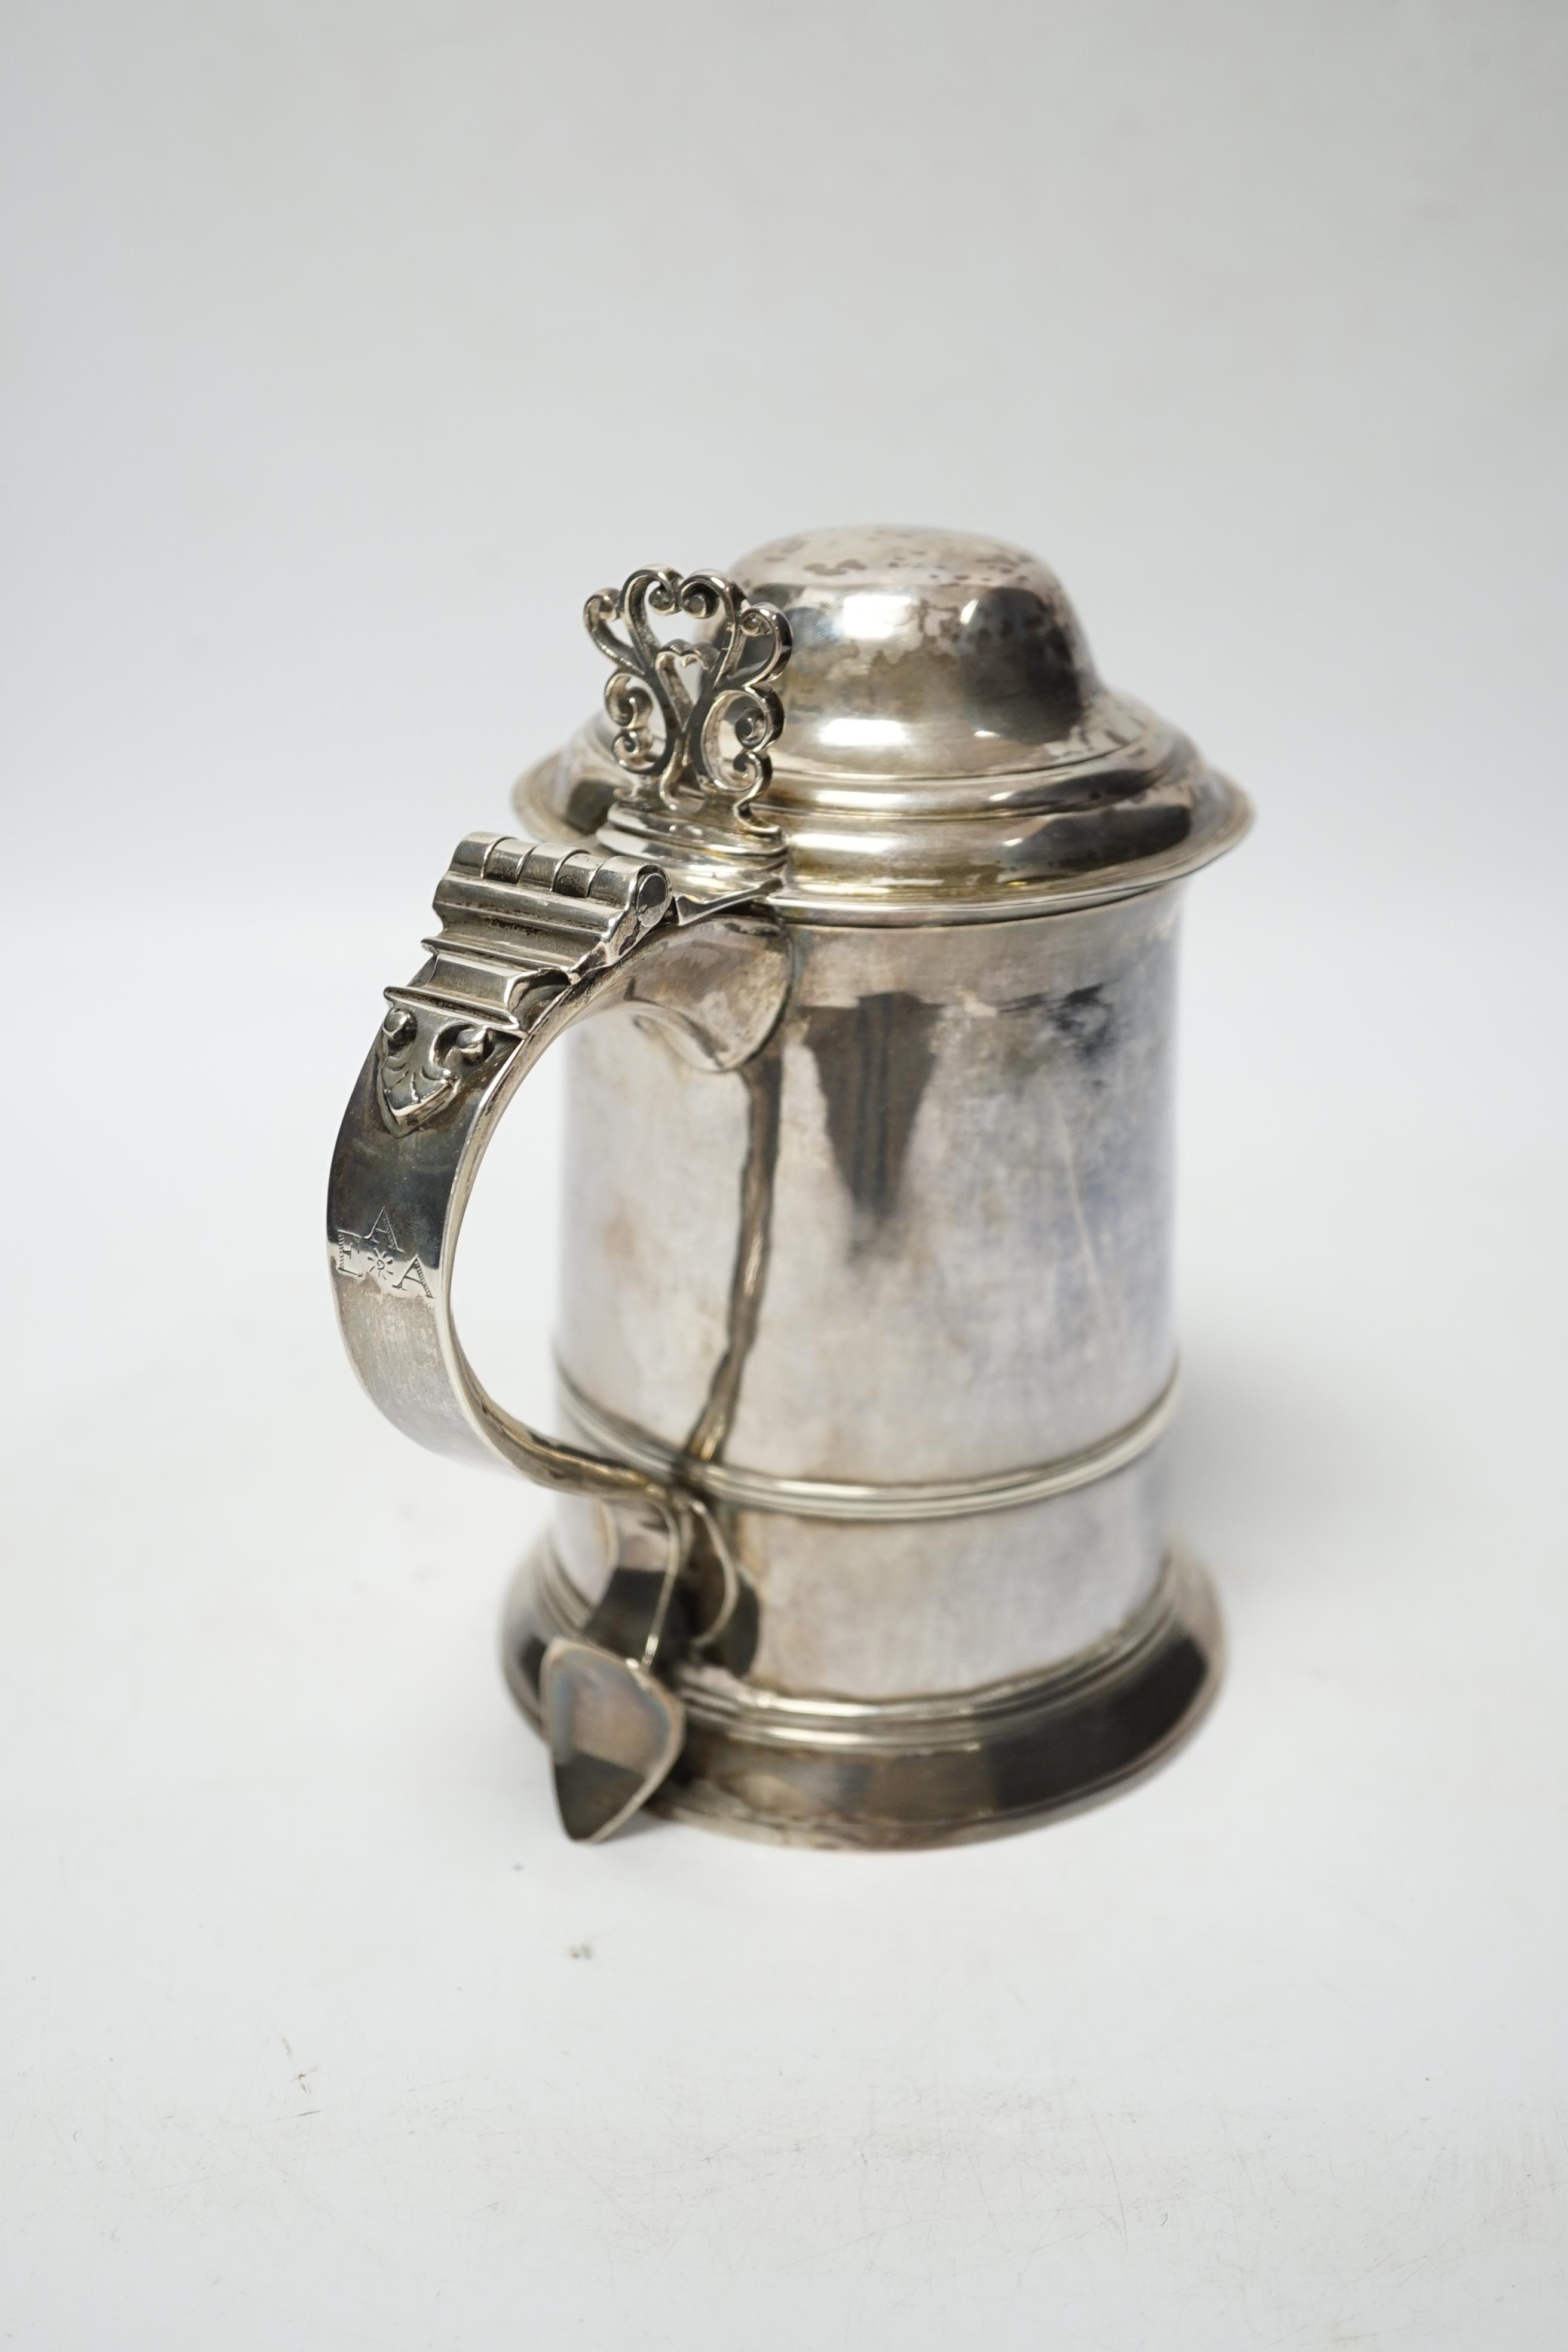 A George III silver tankard, with banded girdle, makers mark on lid and base differ?, London, 1784, height 17.5cm, 17.6oz. (a.f.)